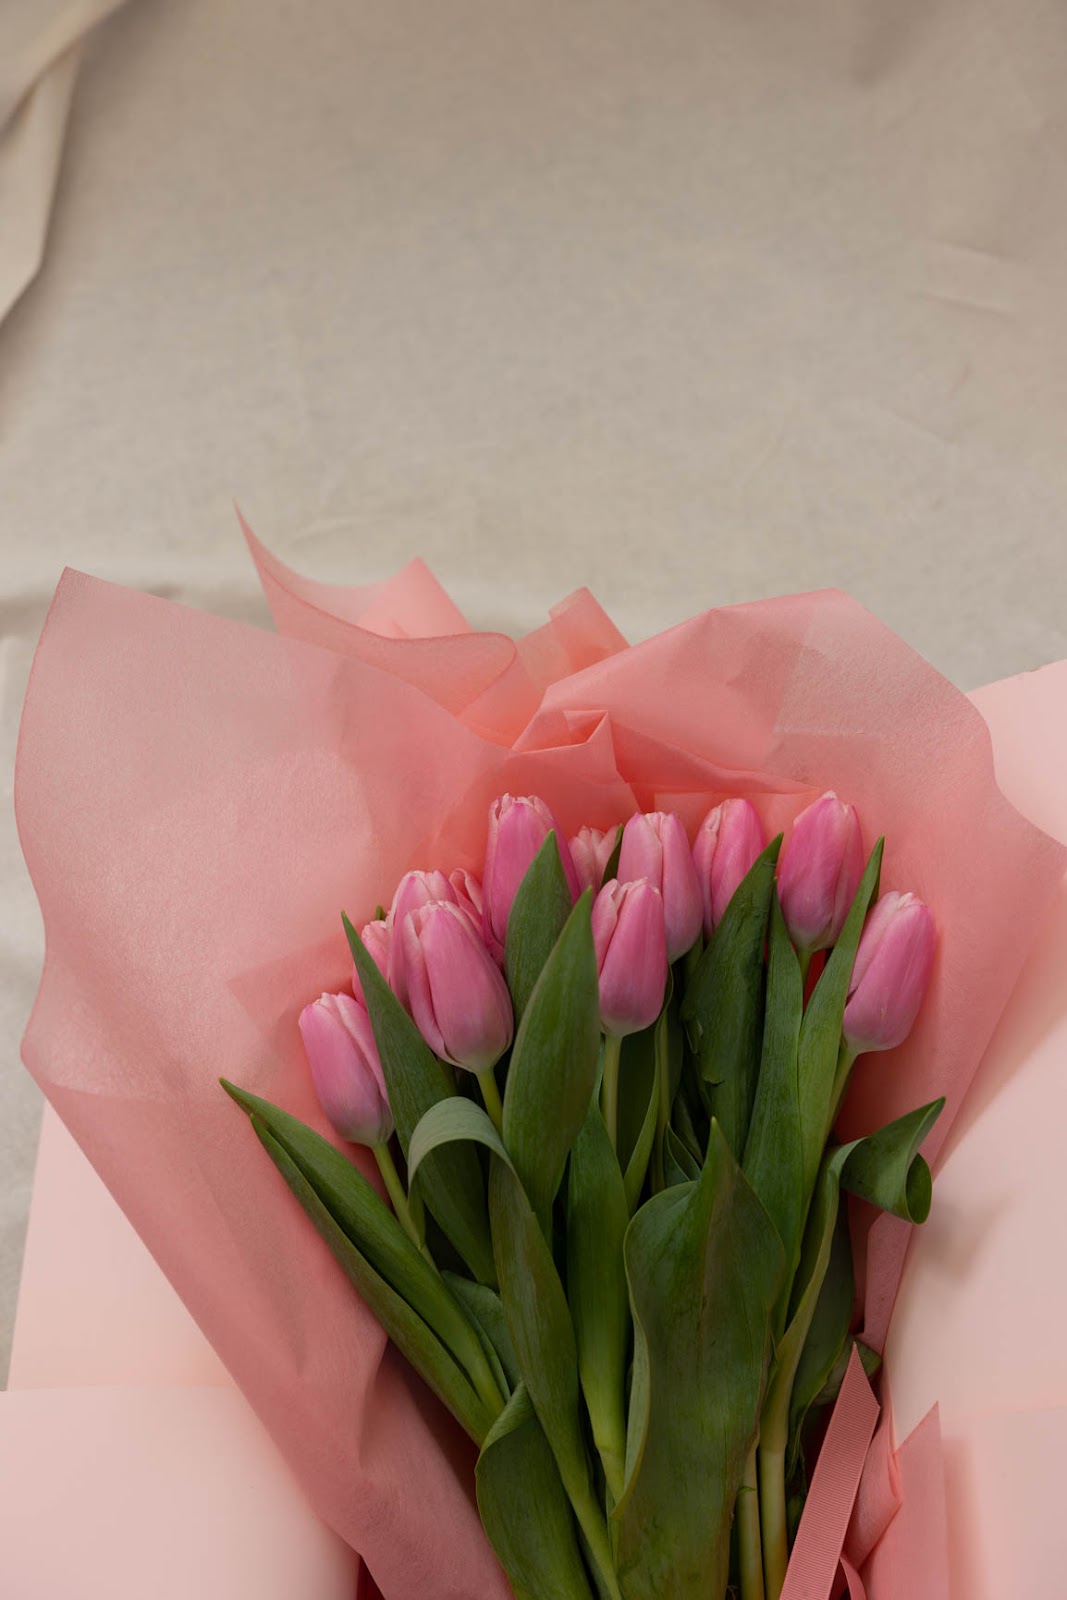 are flowers a good housewarming gift? - tulips